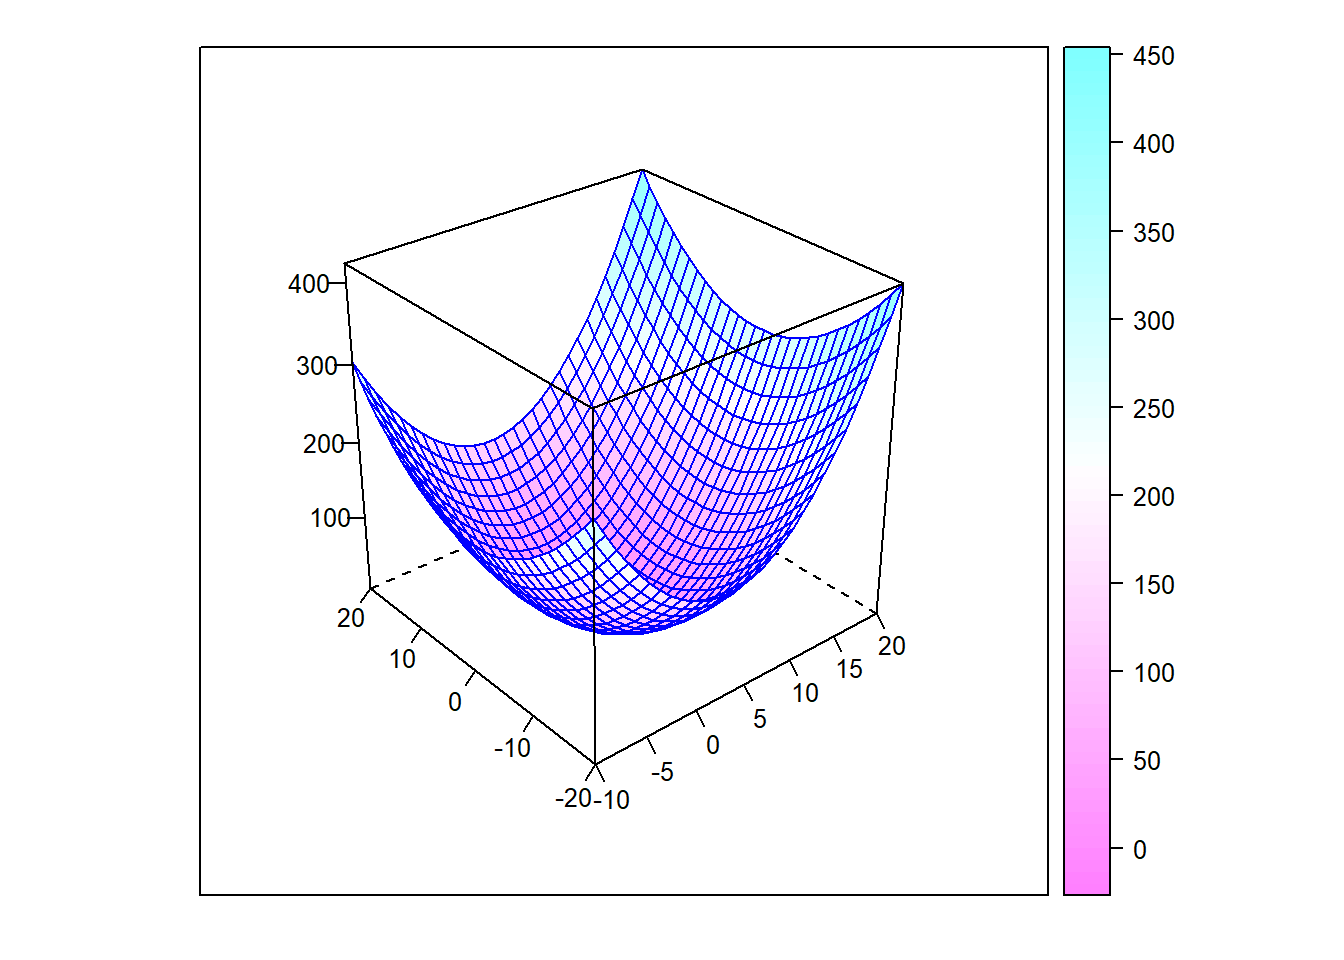 Surface plot of paraboloid shown on a 3-dimensional square domain.